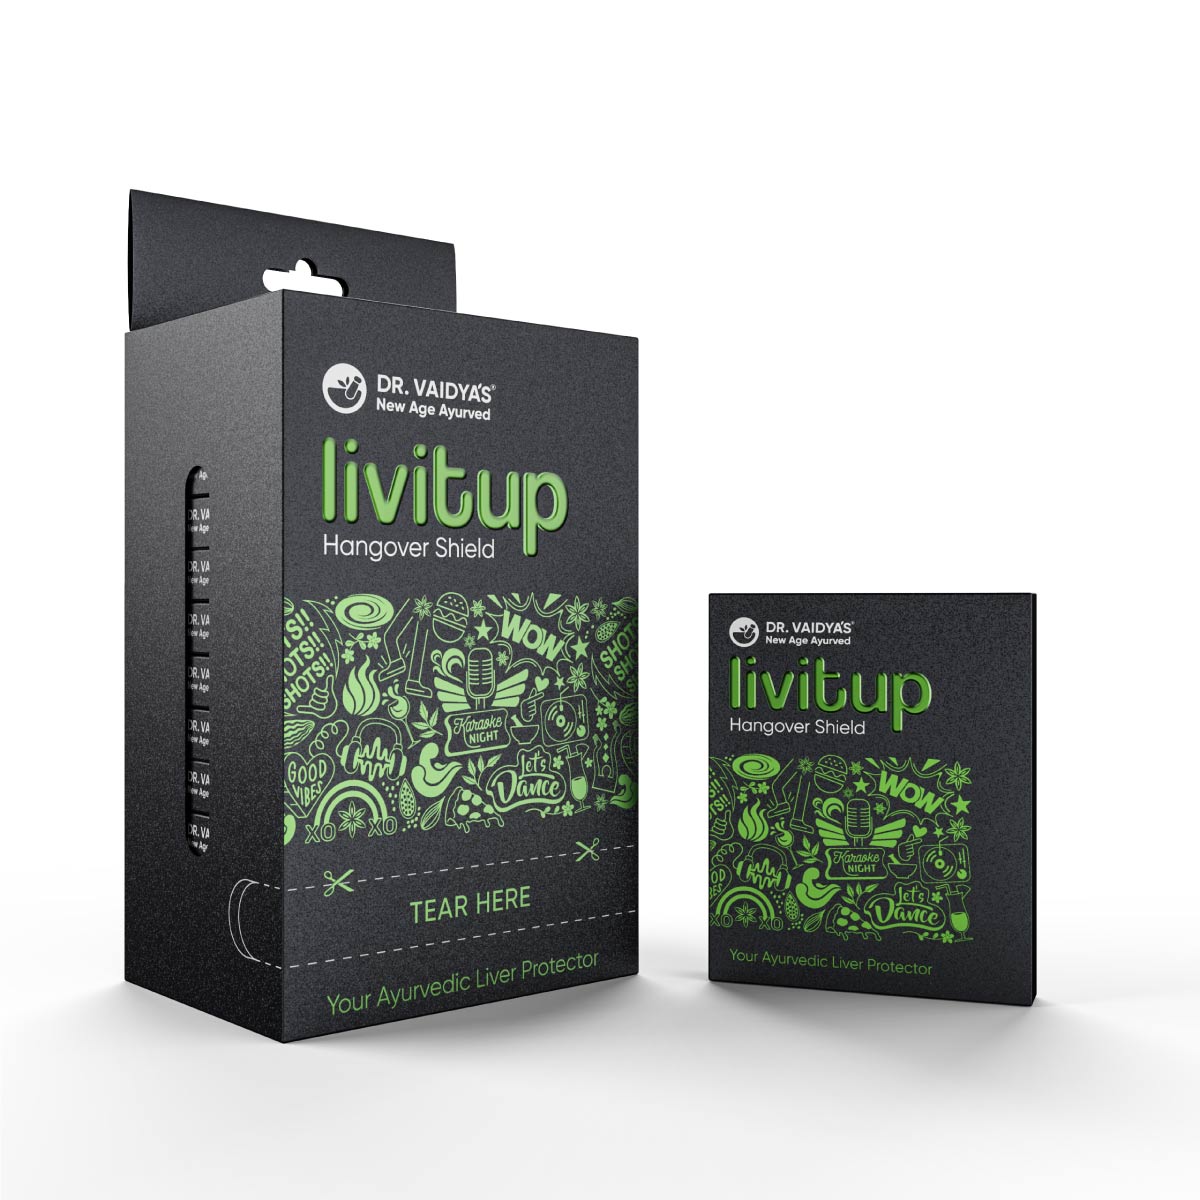 LIVitup Party Pack: For Preventing Hangovers For You & Your Friends